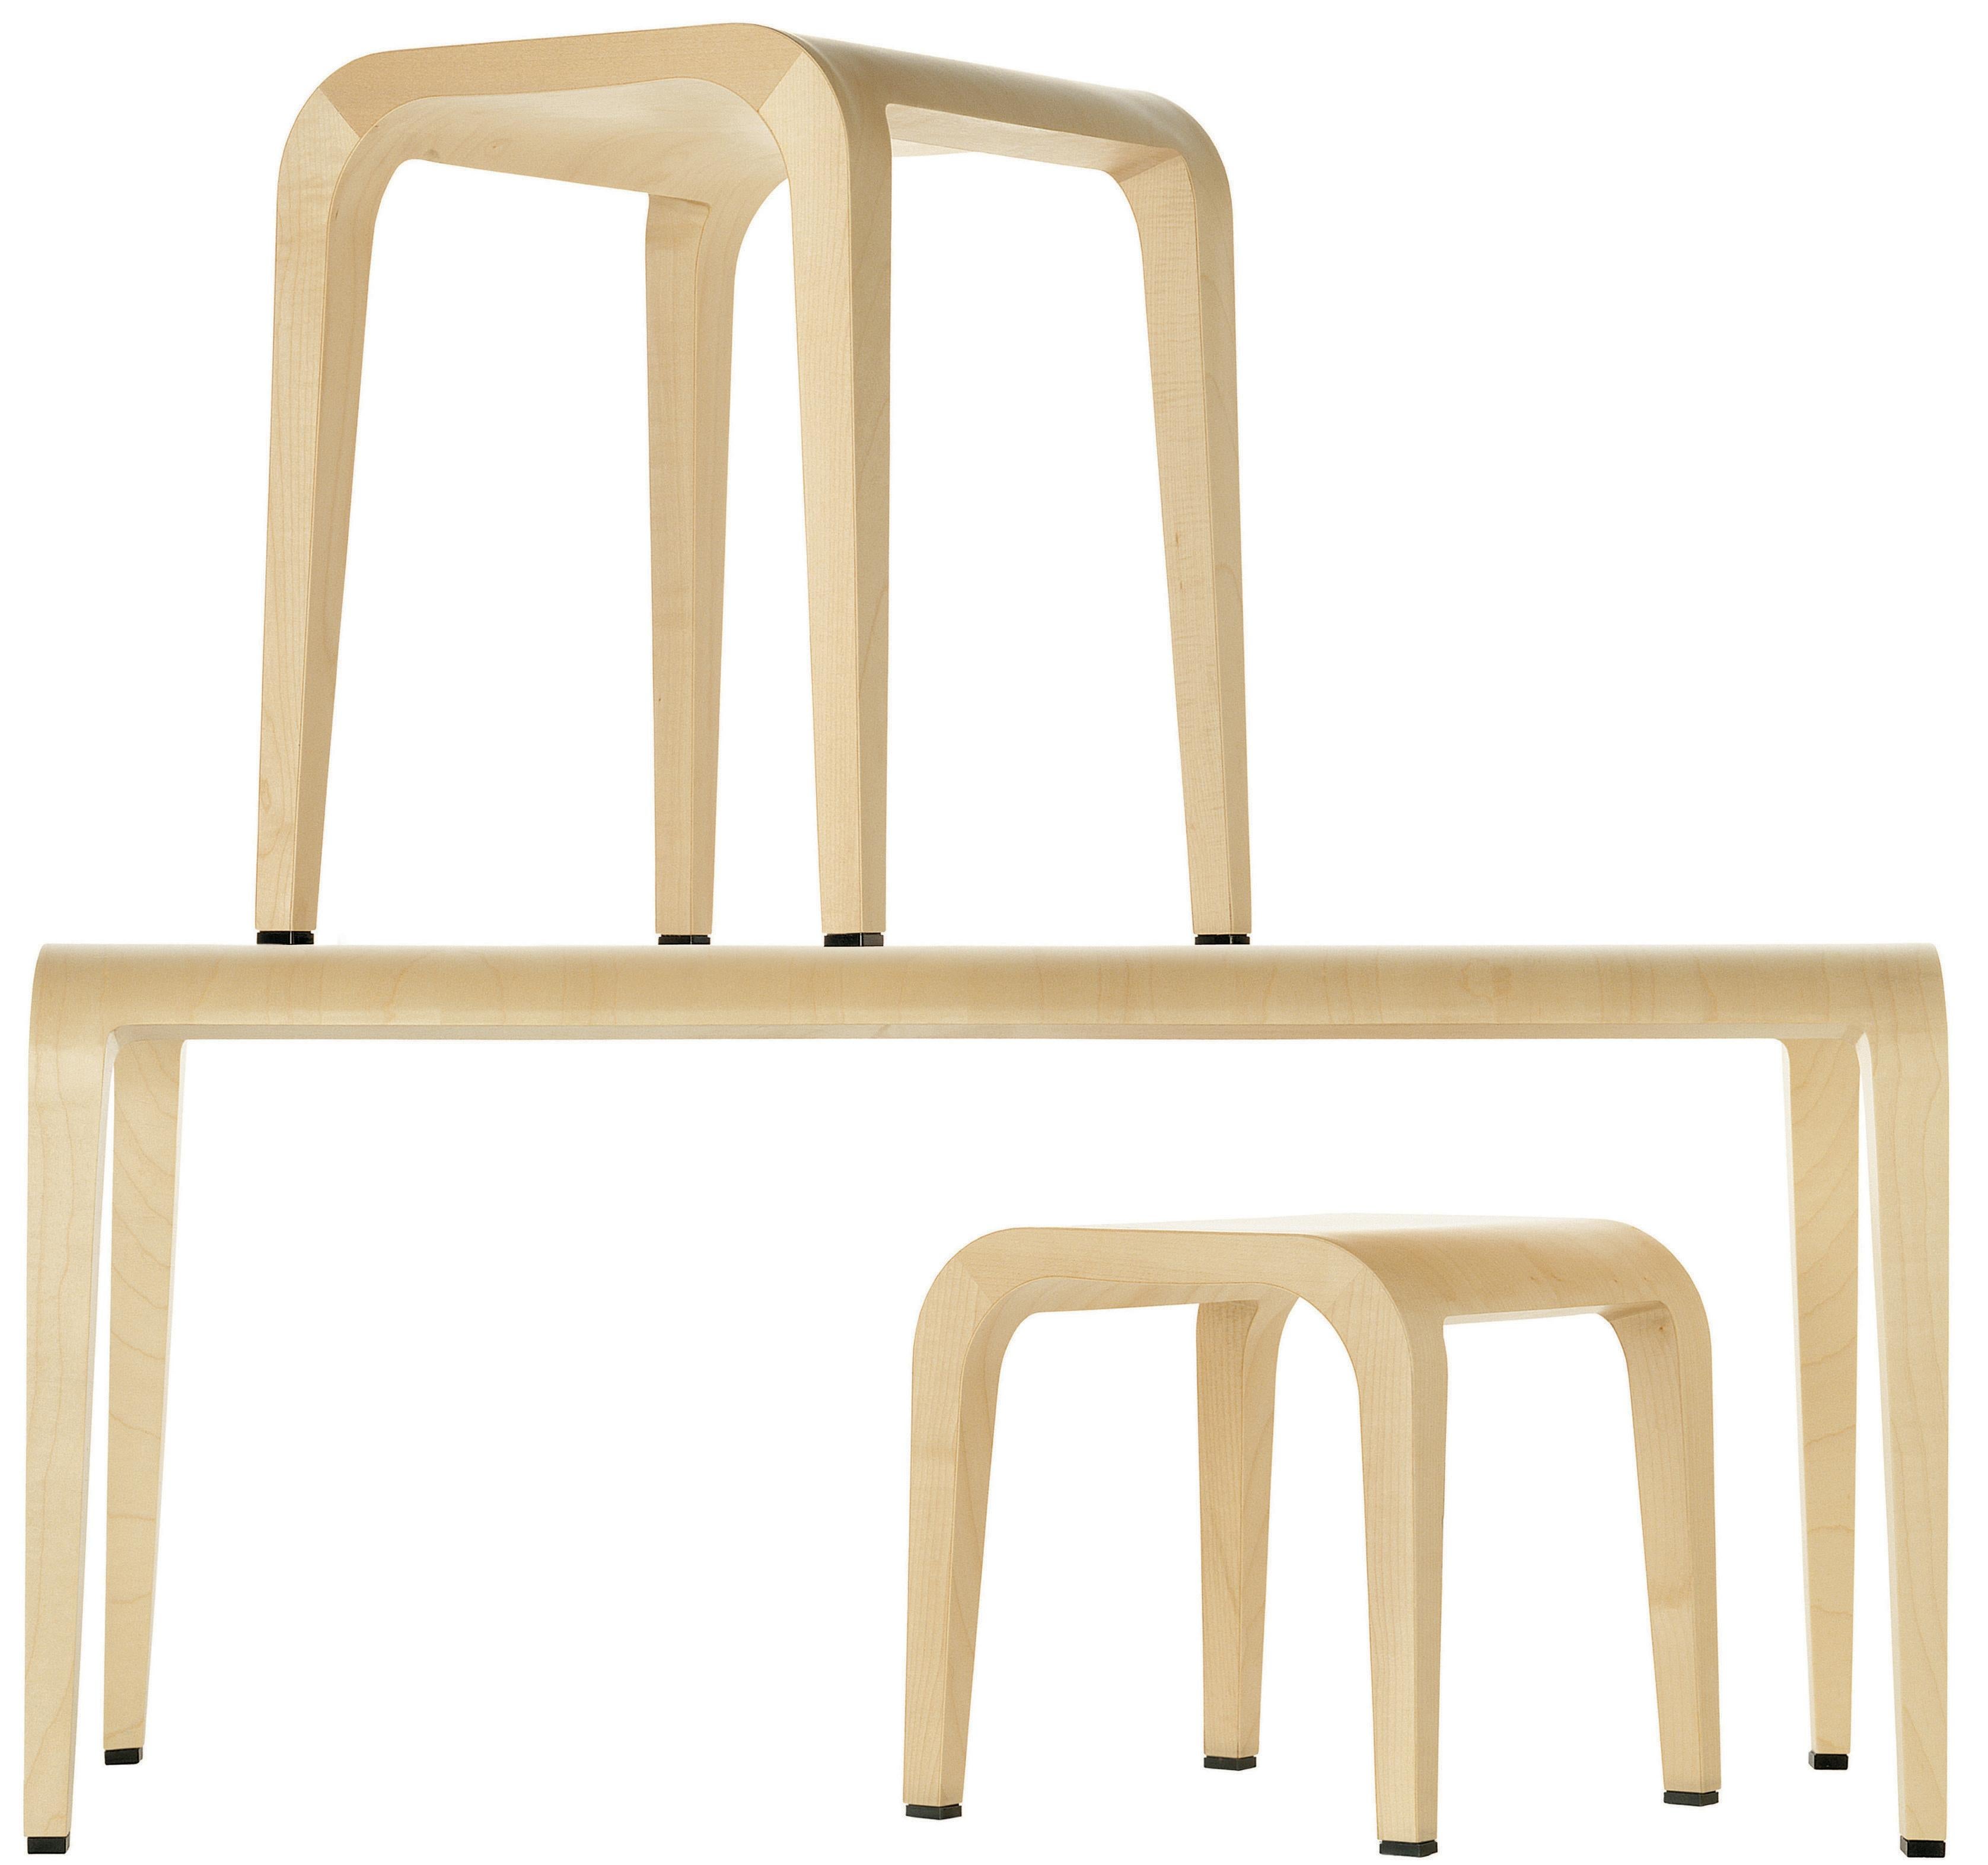 Alias 310 Laleggera Stool in White Color Stained Oak Frame by Riccardo Blumer by Riccardo Blumer

Stool with structure in solid maple or ash. Maple veneer or oak veneer. Internal support in injected polyurethane foam. Finish in transparent laquage